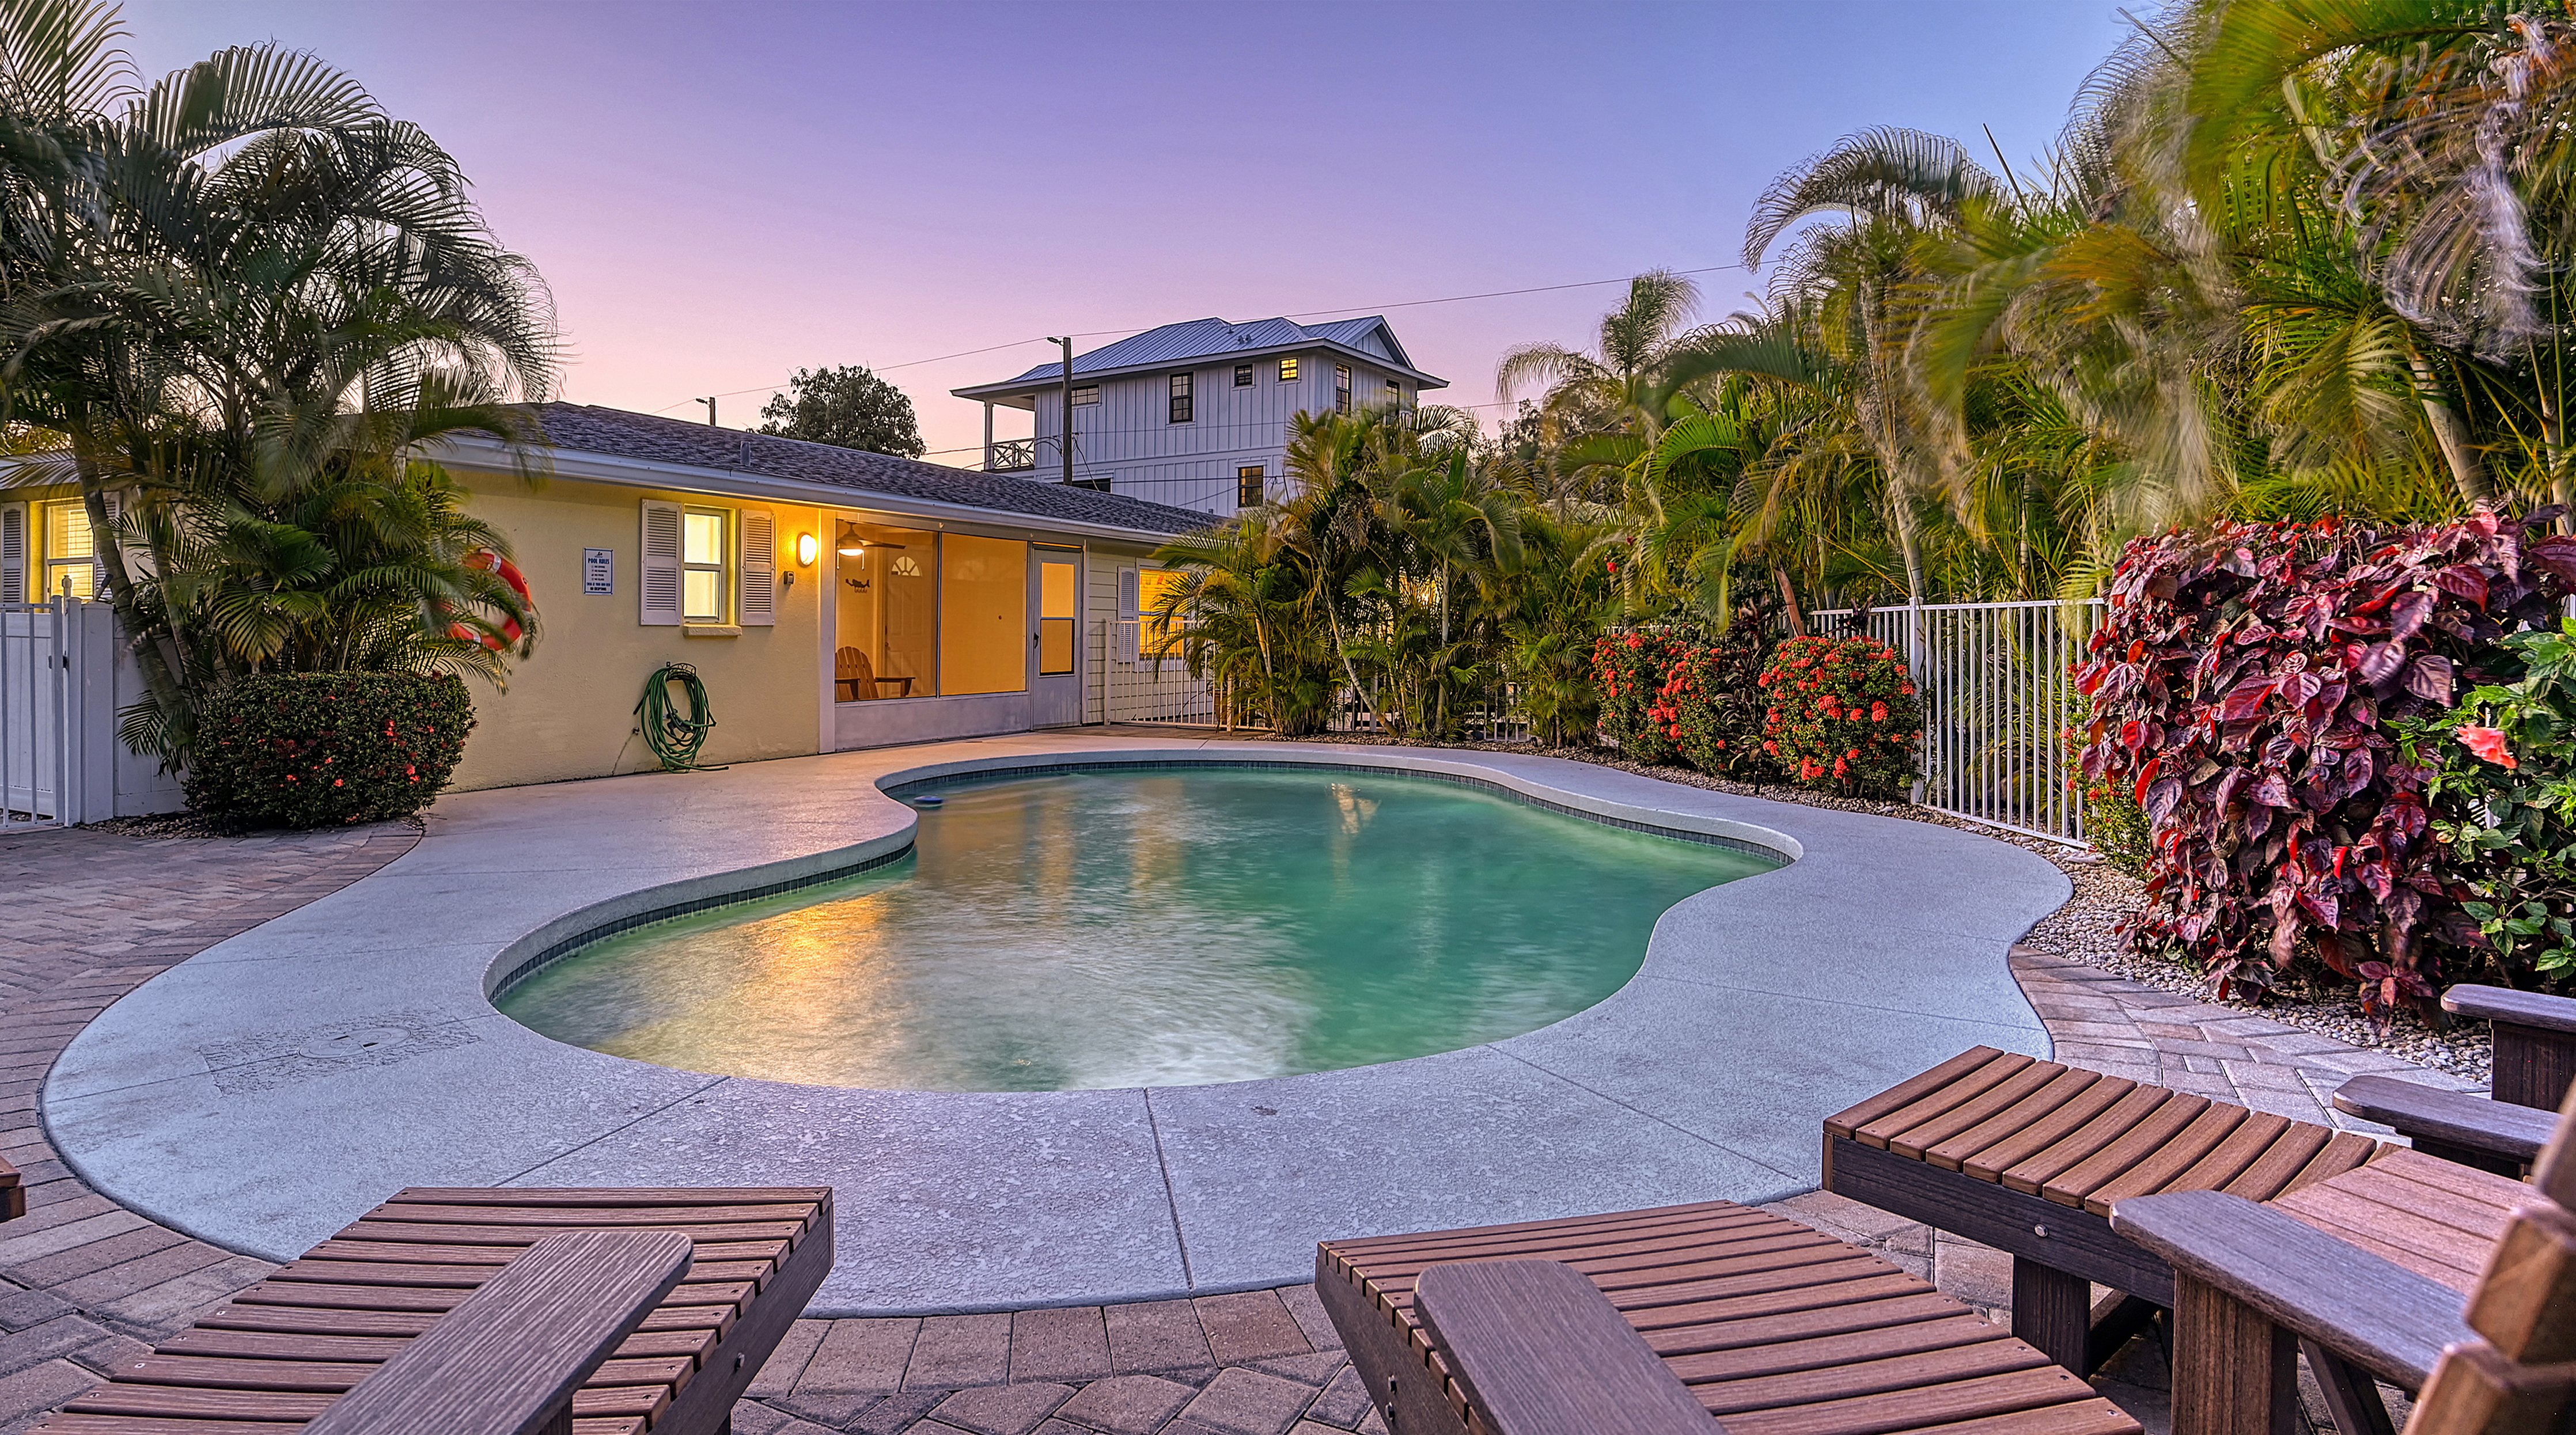 The Solaster | Pet Friendly Home on Siesta Key w/ 2 Heated Pools, Walk to Beach & South Village!